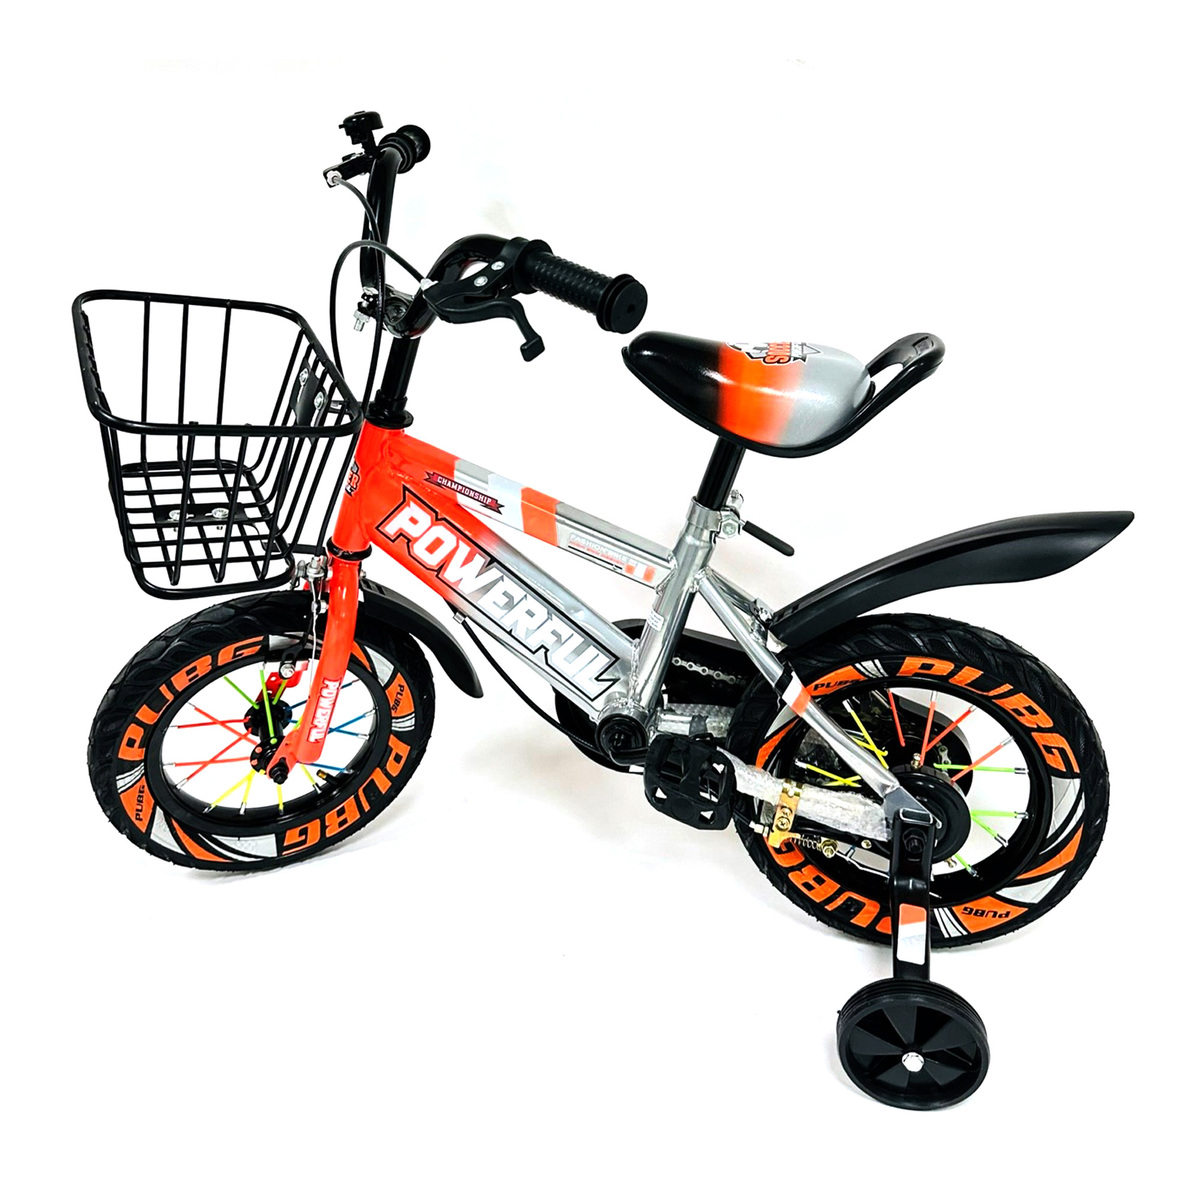 Skid Fusion Kids Bicycle 14" CT-116-14 Assorted Color